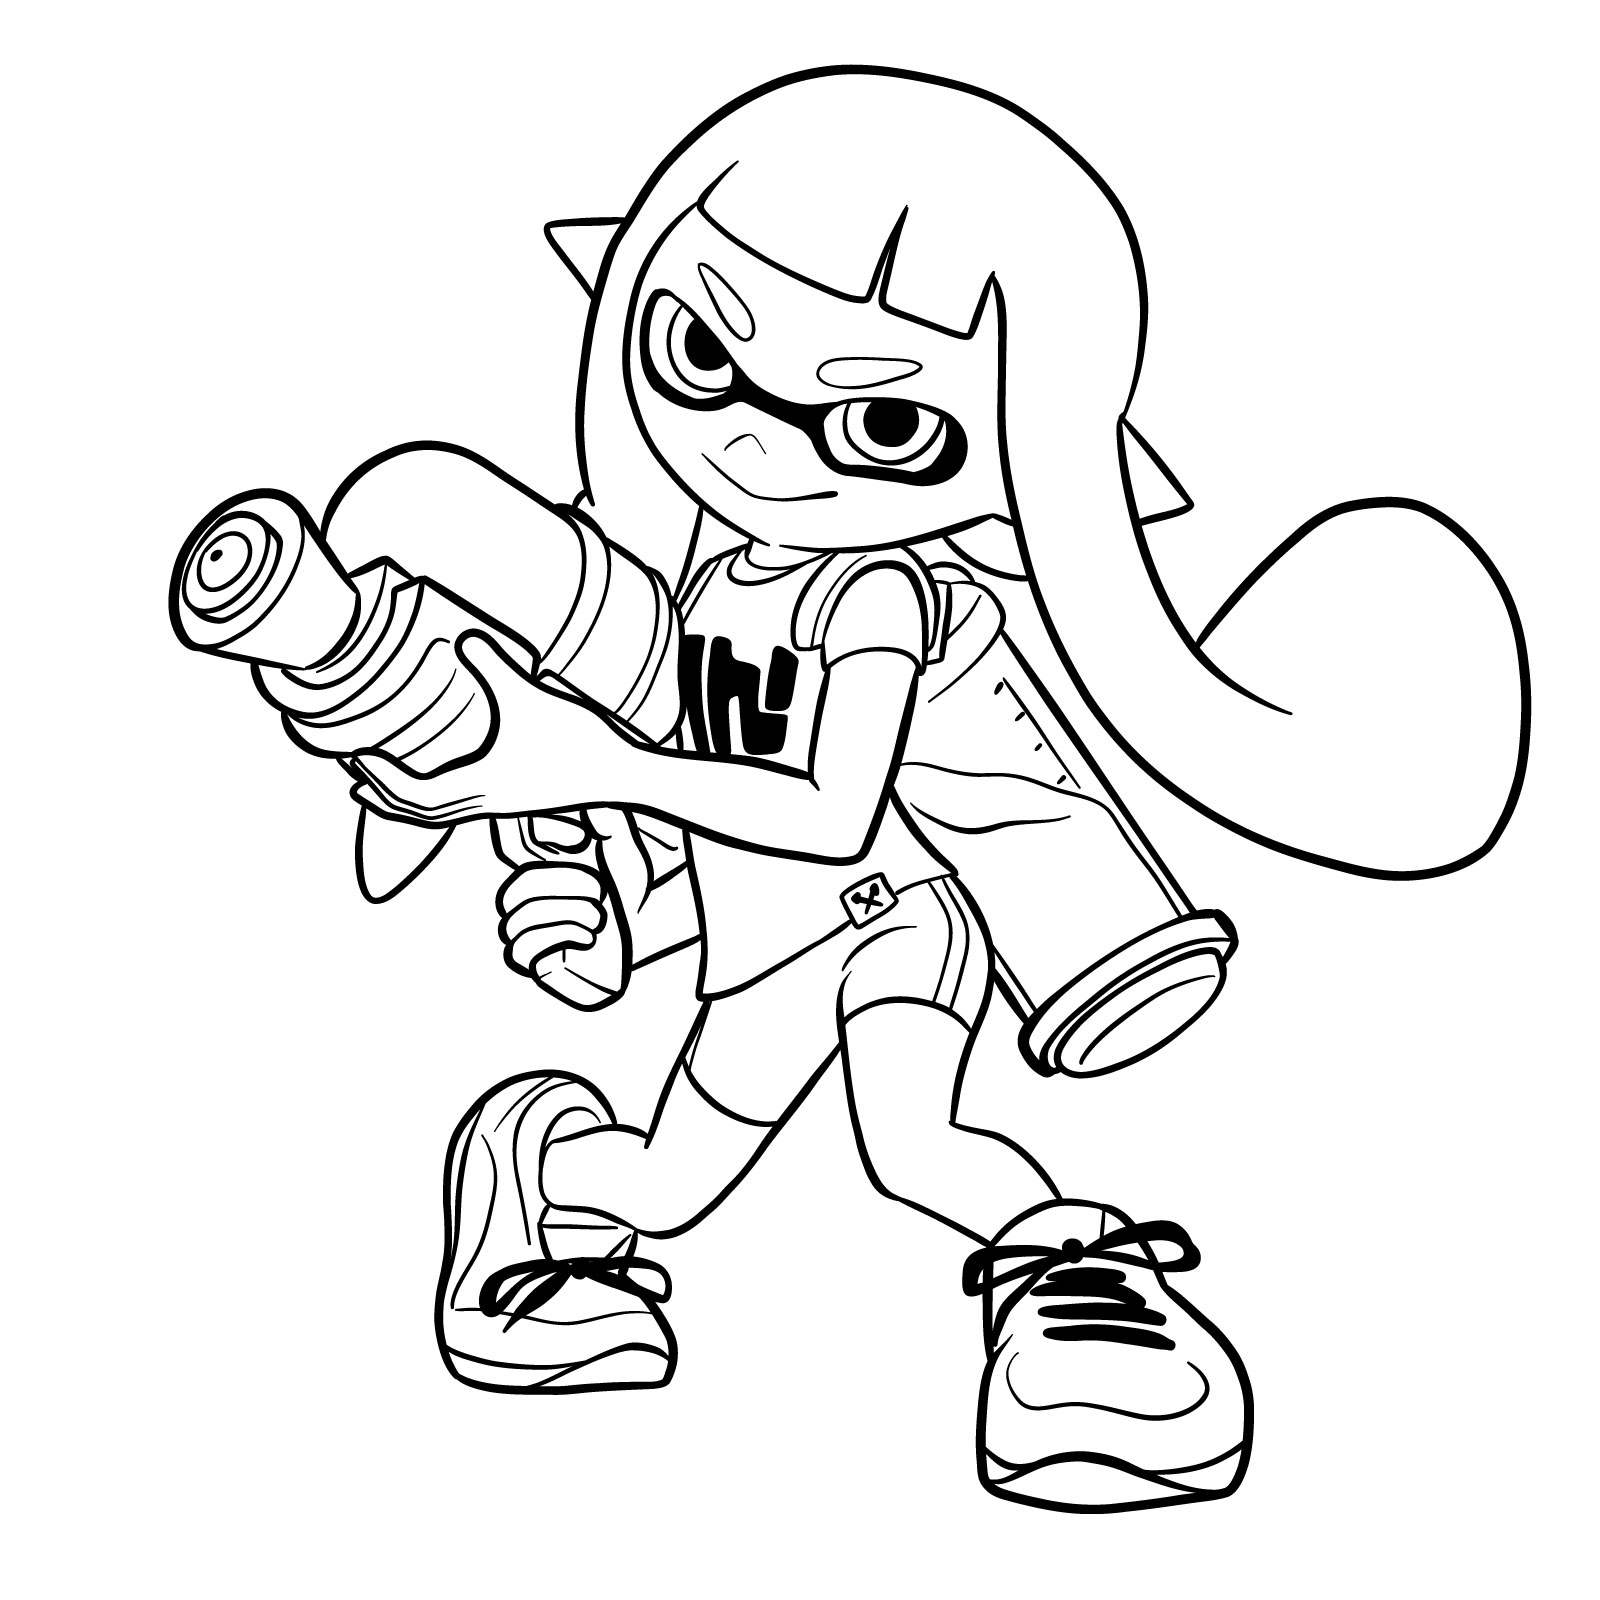 How to draw an Inkling Girl - final step